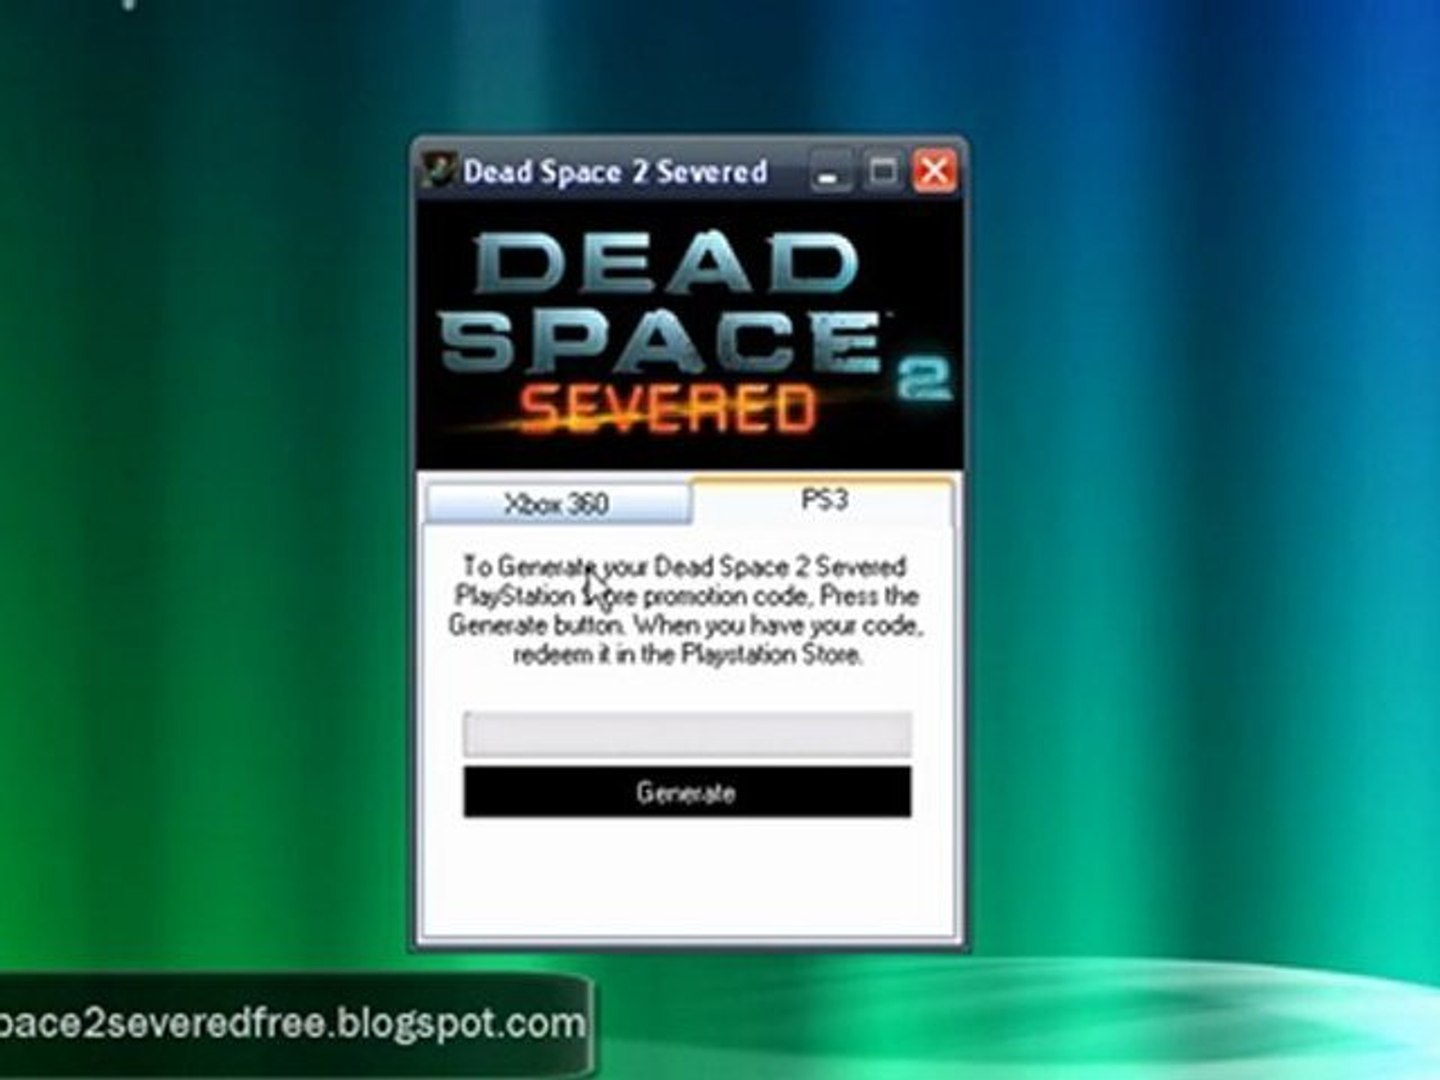 Dead Space 2 Severed DLC Code Generator Leaked - video Dailymotion